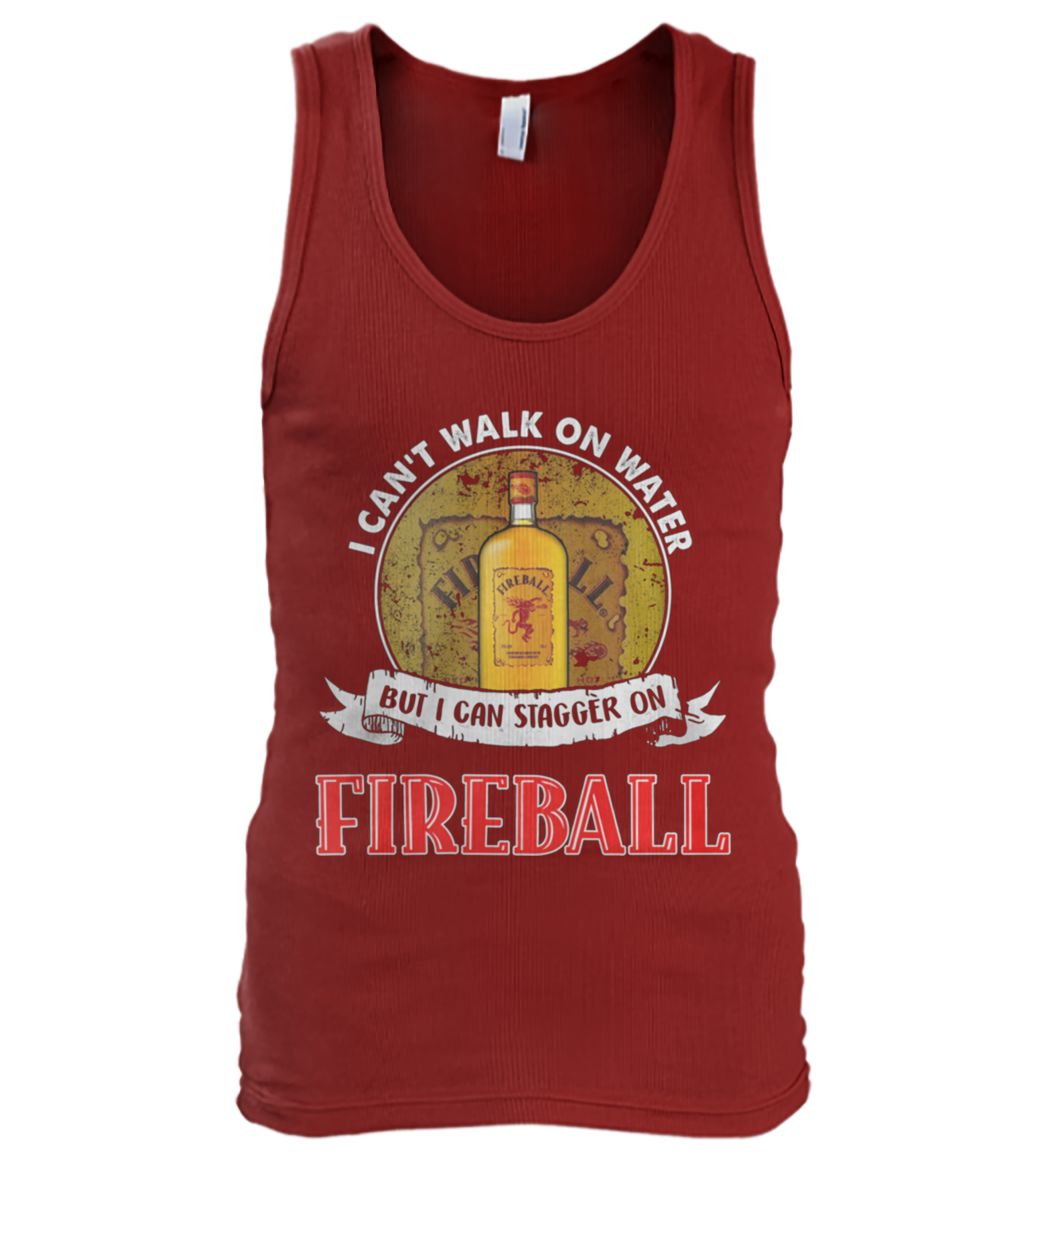 I can't walk on water but I can stagger on fireball men's tank top